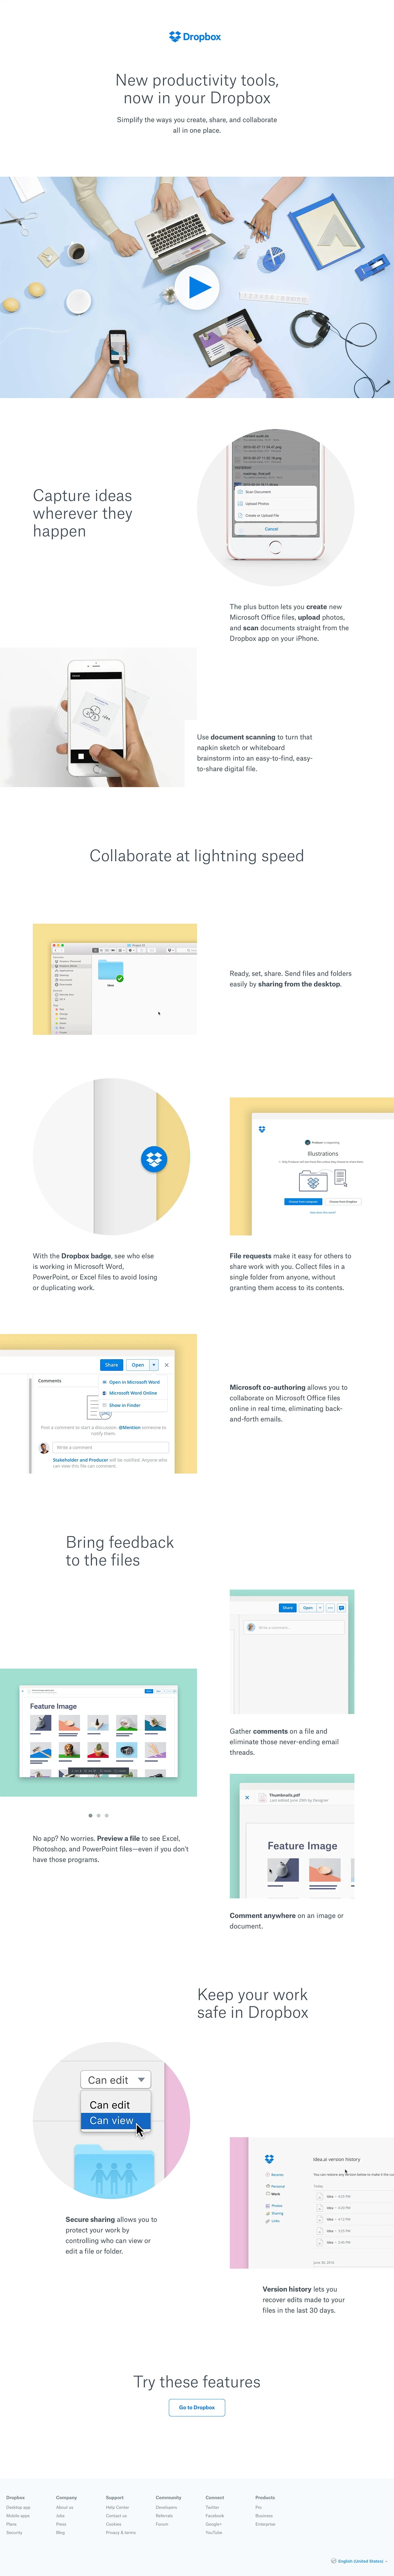 Dropbox Productivity Landing Page Example: Dropbox has new productivity features to simplify the way you create, collaborate, and keep work safe. Learn how to get more done and get started.